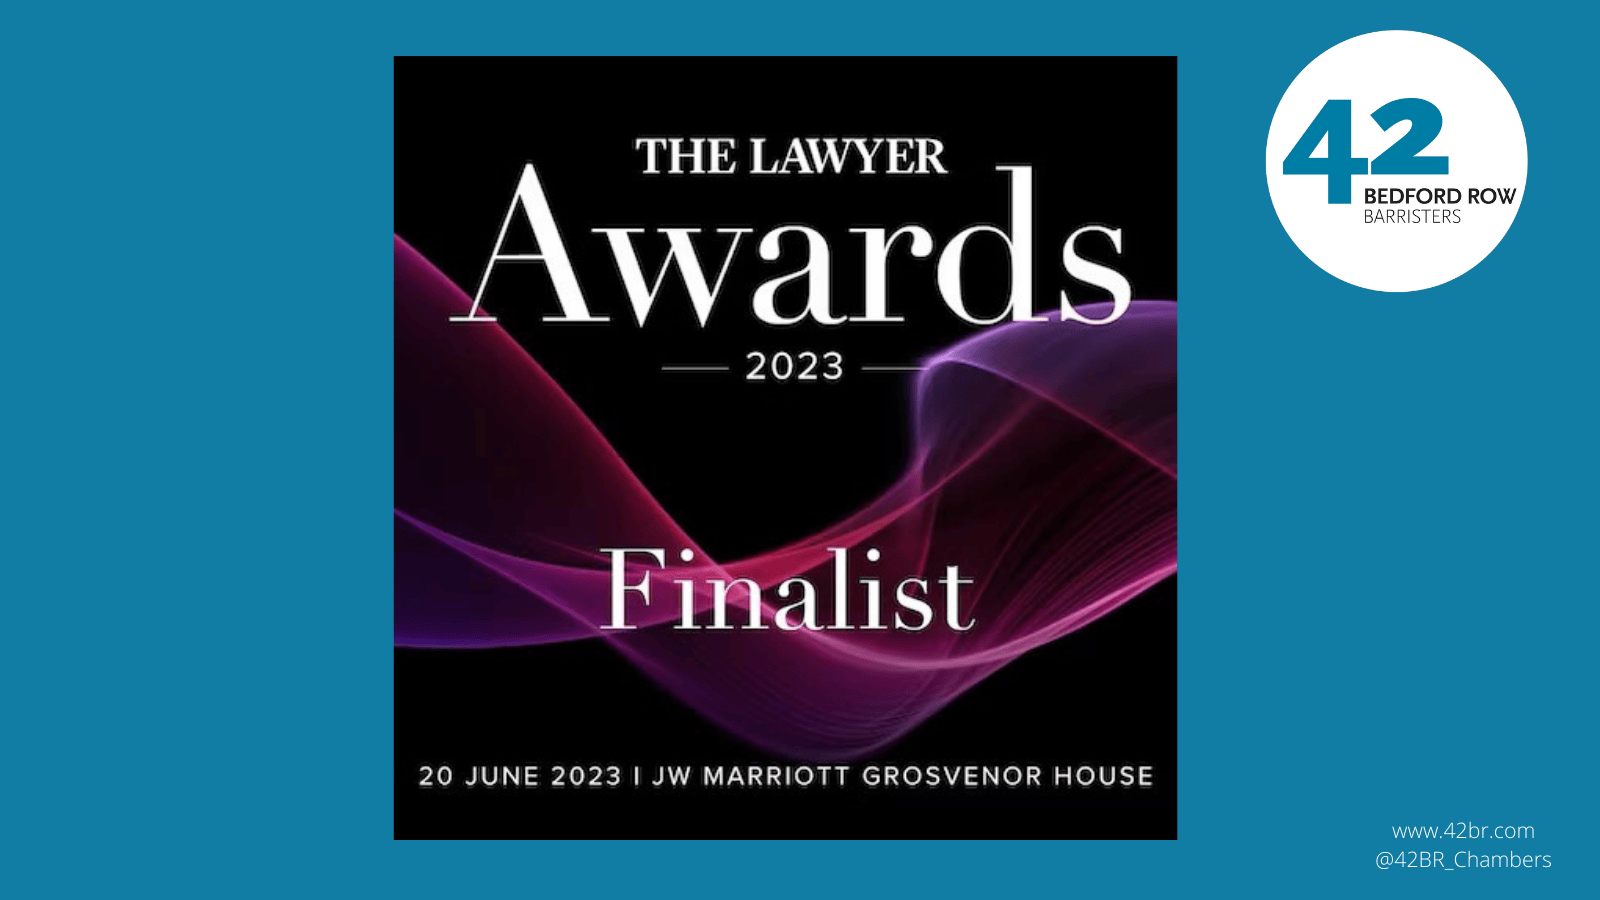 42 Bedford Row Barristers shortlisted for 'Chambers of the Year' at the Lawyer Awards 2023